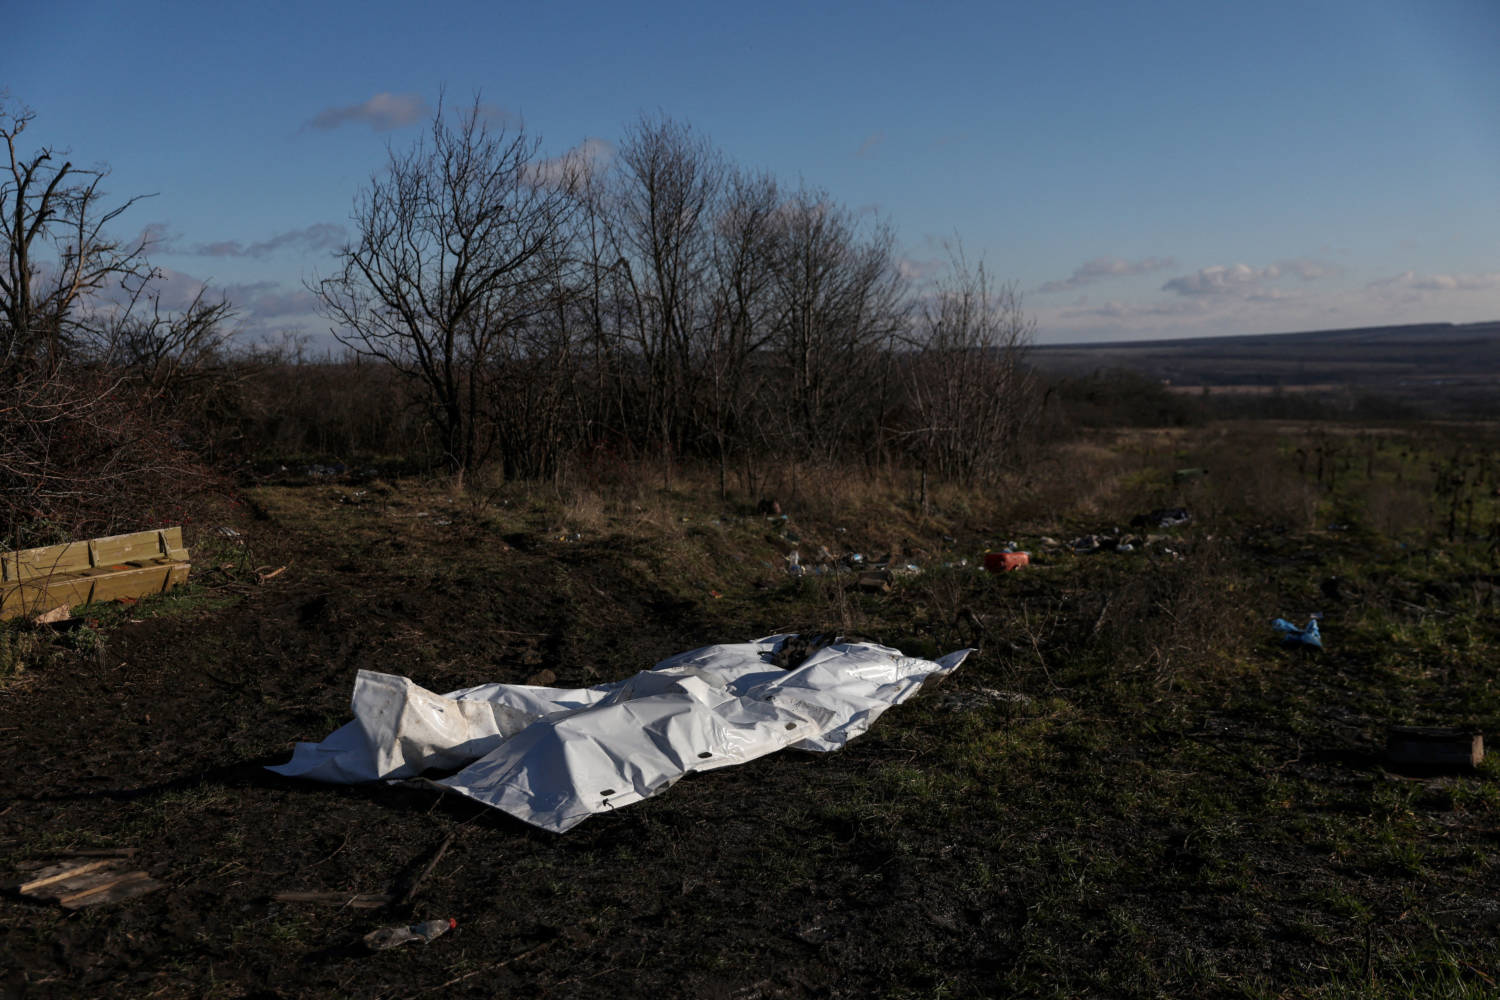 Bodies Of Dead Russian Soldiers Lay Covered For The Exchange Of Fallen Ukrainian Soldiers Remains In The Former Russian Occupied Region Of Donetsk Oblast Region